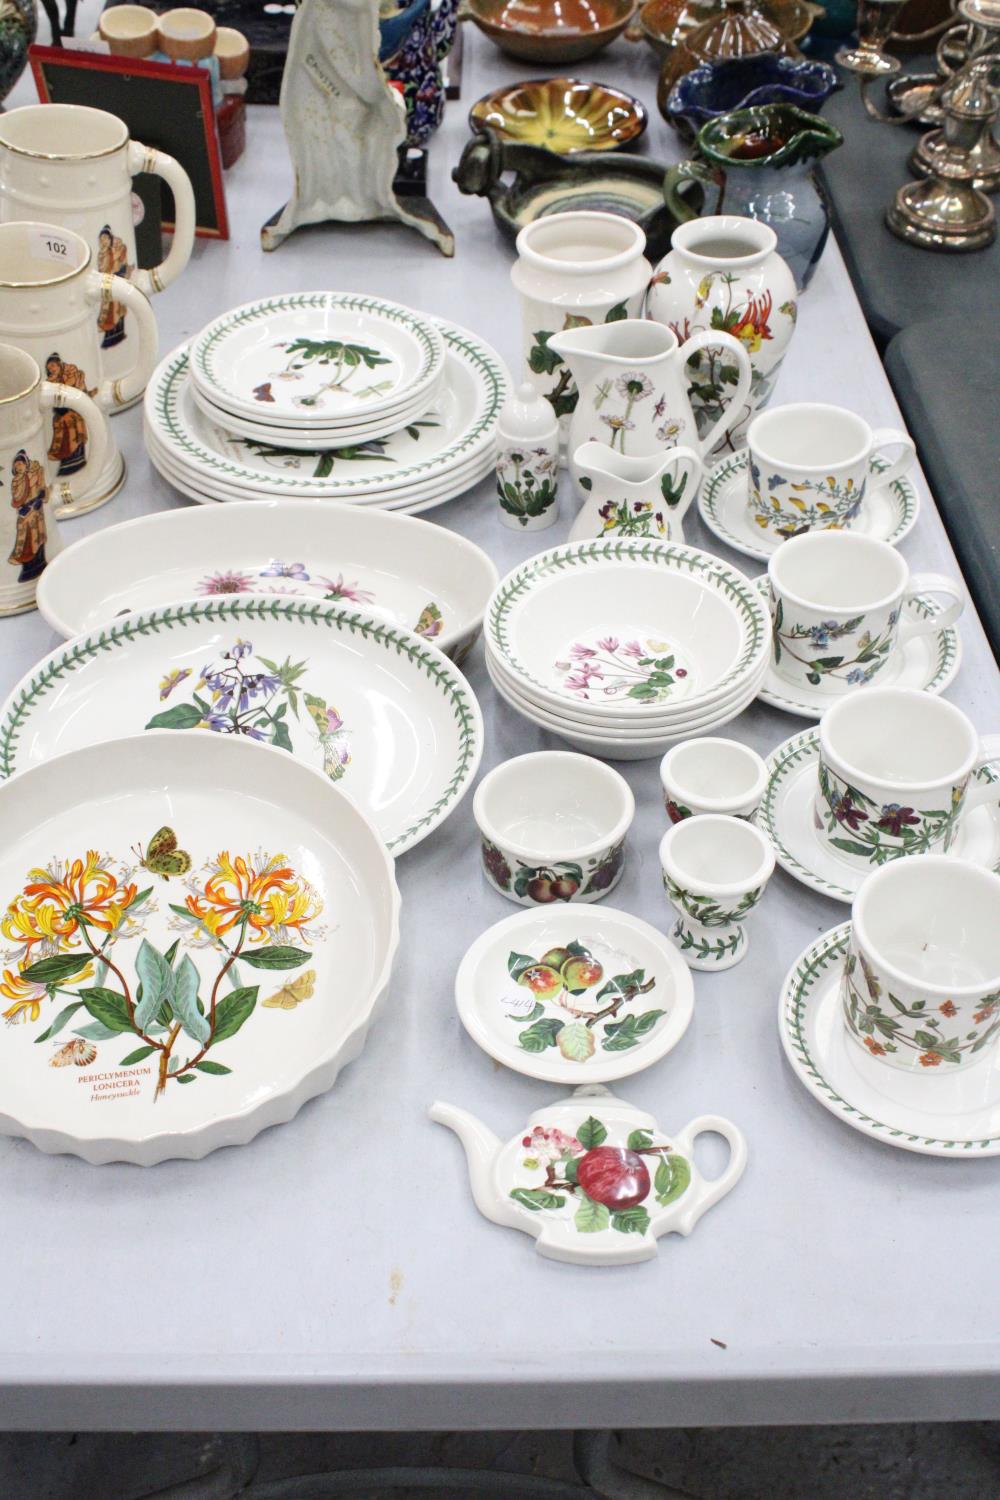 A LARGE QUANTITY OF PORTMEIRION BONTANIC GARDEN DINNERWARE - TO INCLUDE JUGS, PLATES, EGG CUPS ETC